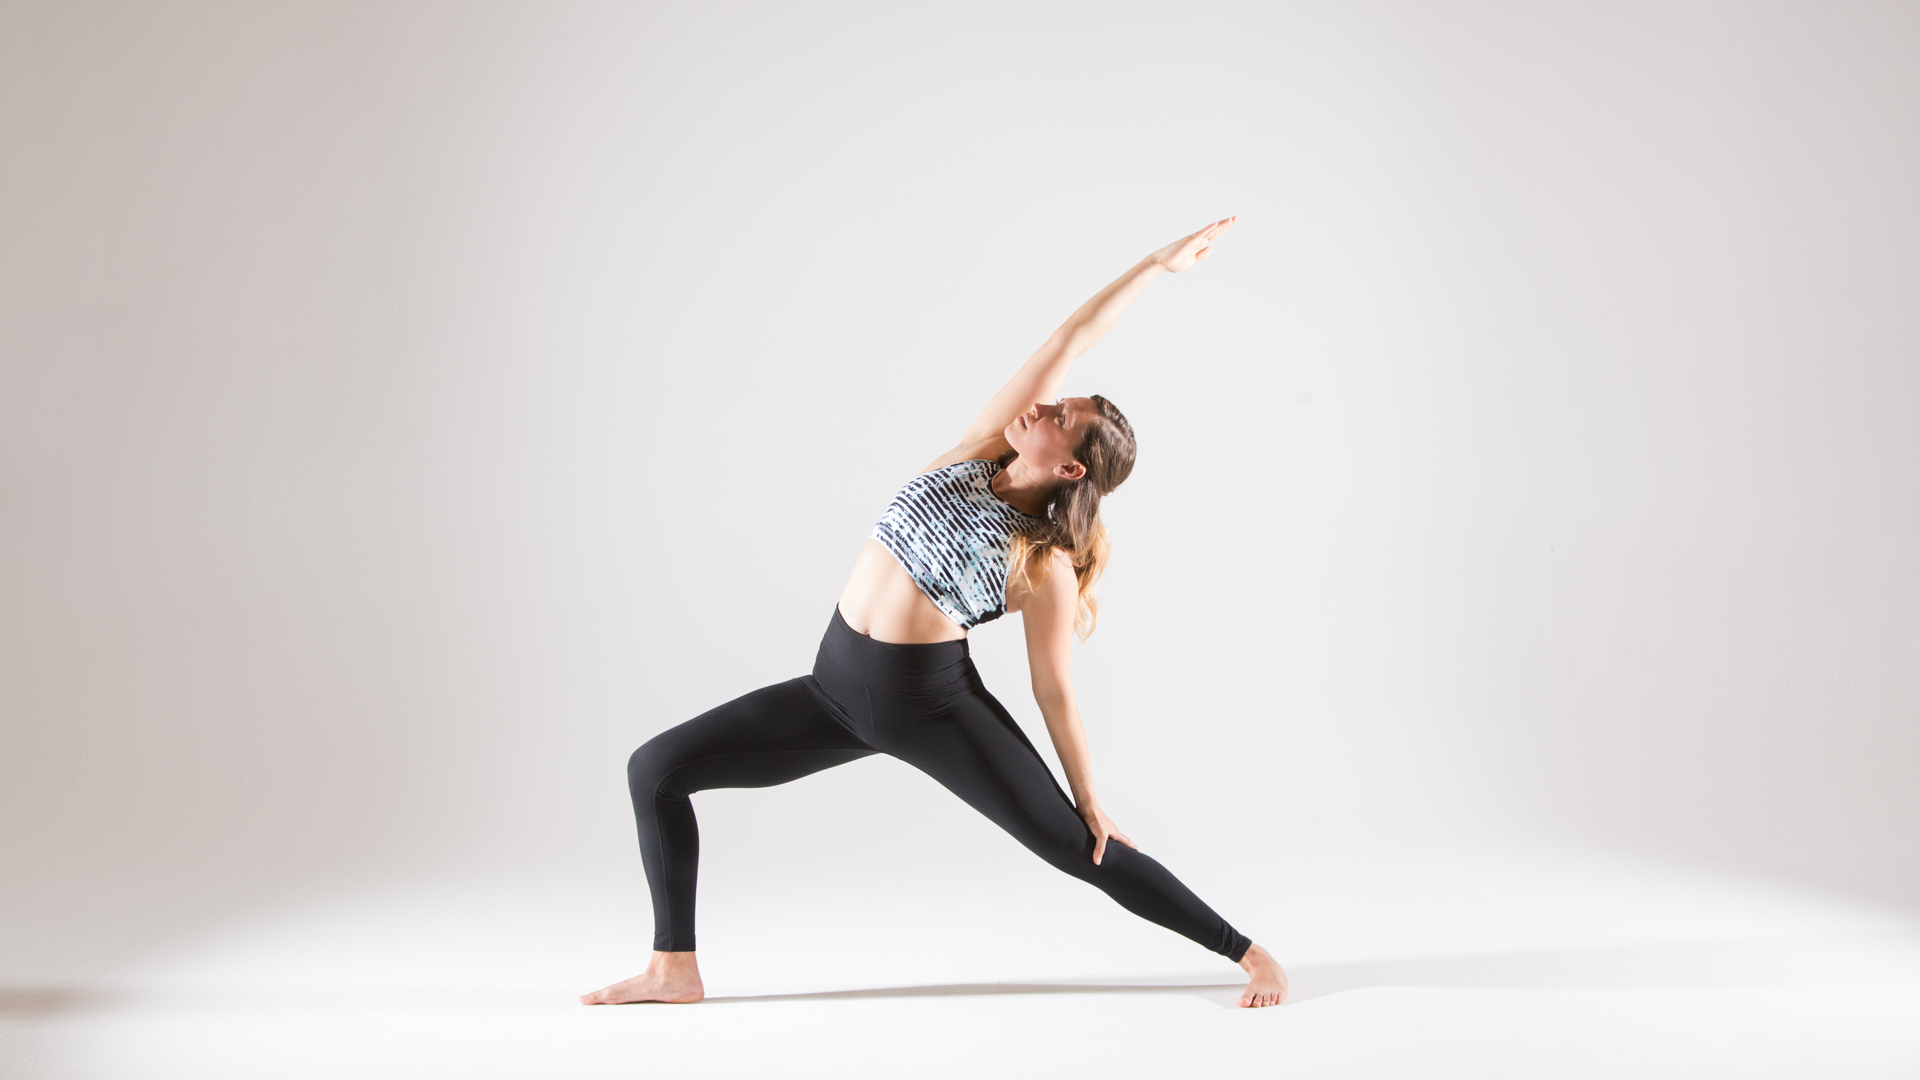 Pose for Camera or Pose for Life | Yoga Digest